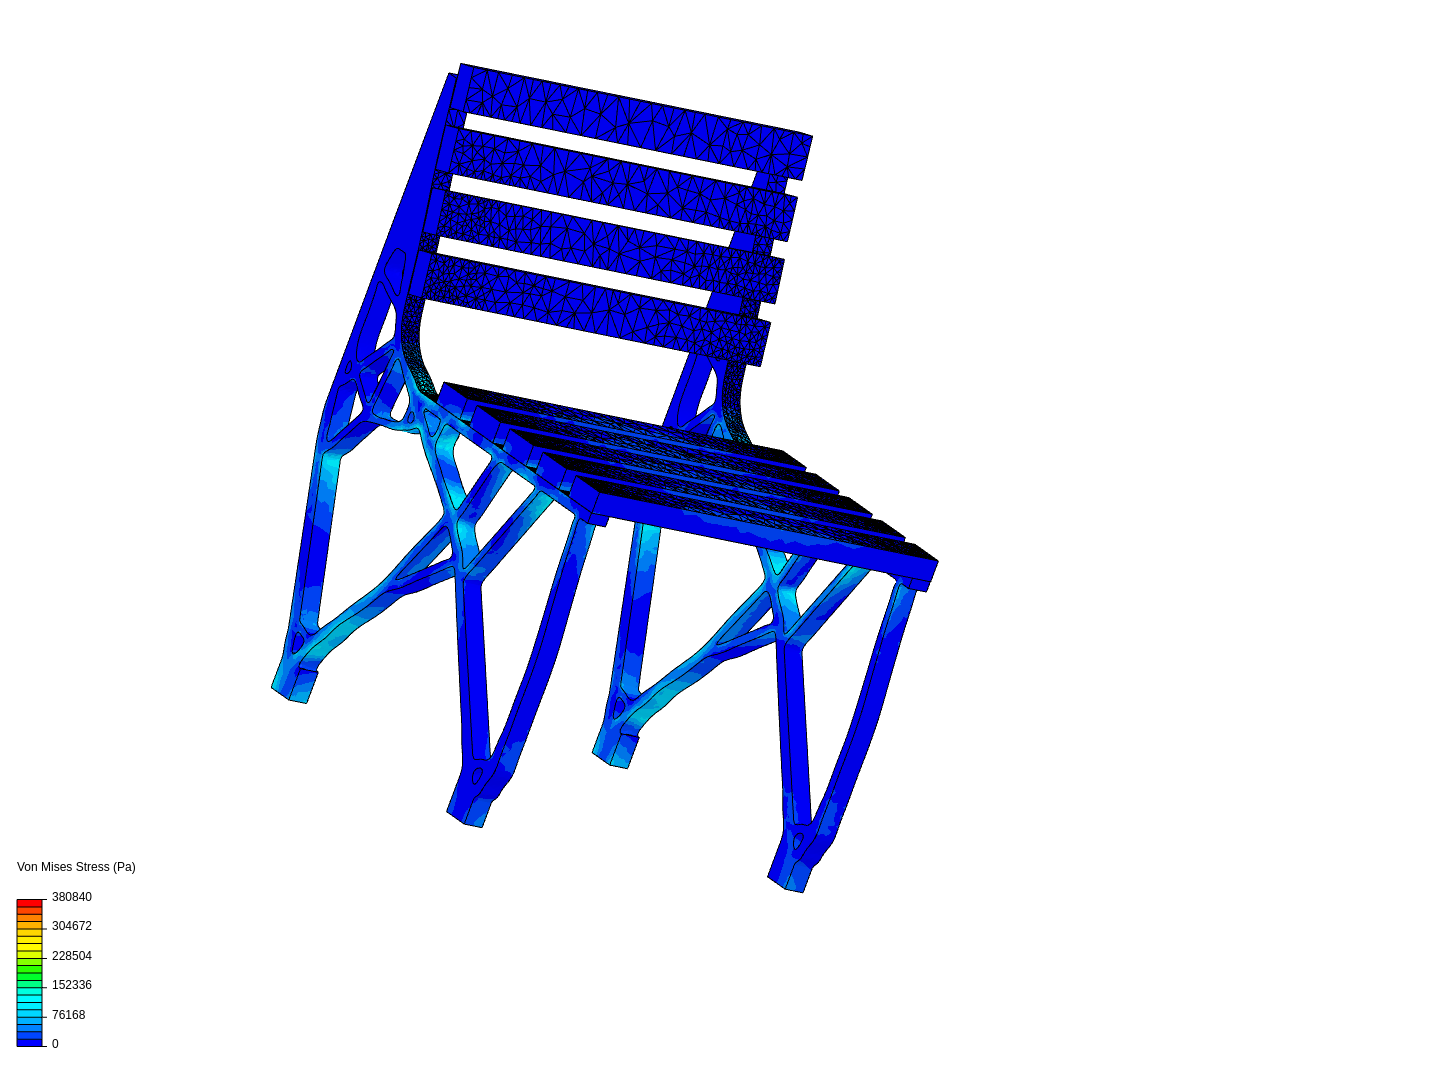 Wooden Chair 2xis cut image